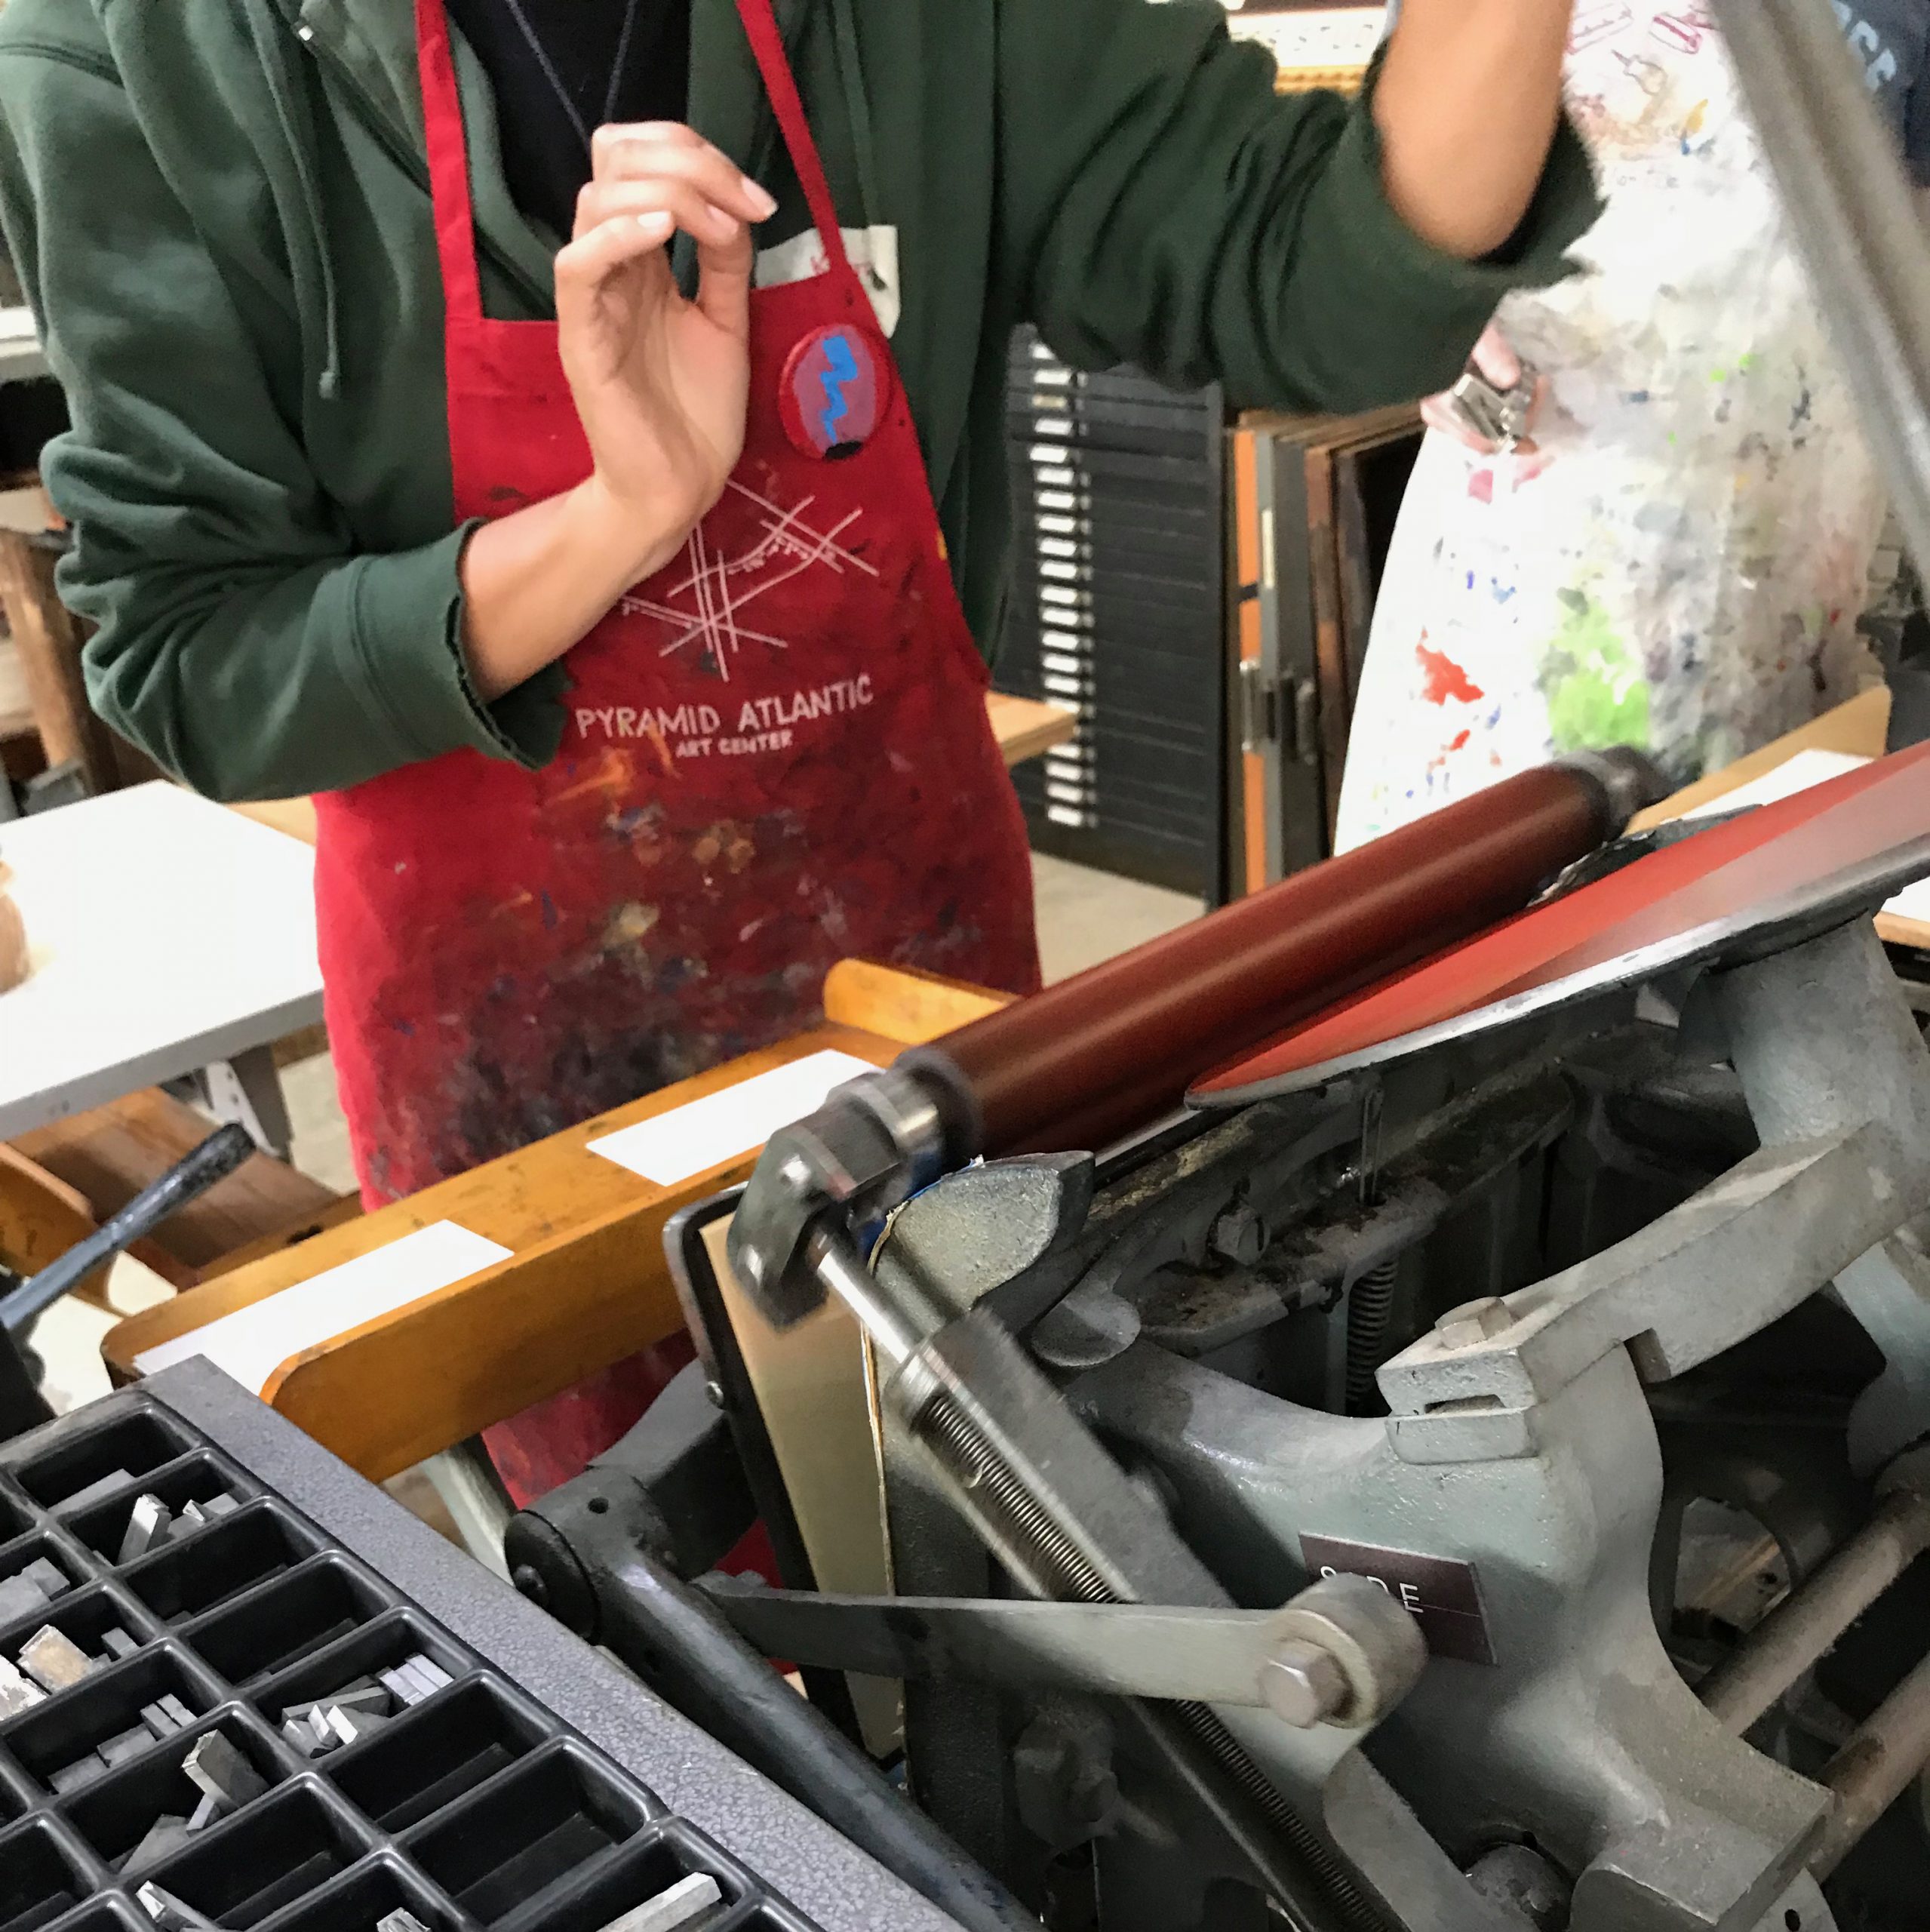 Introduction to Tabletop Letterpress